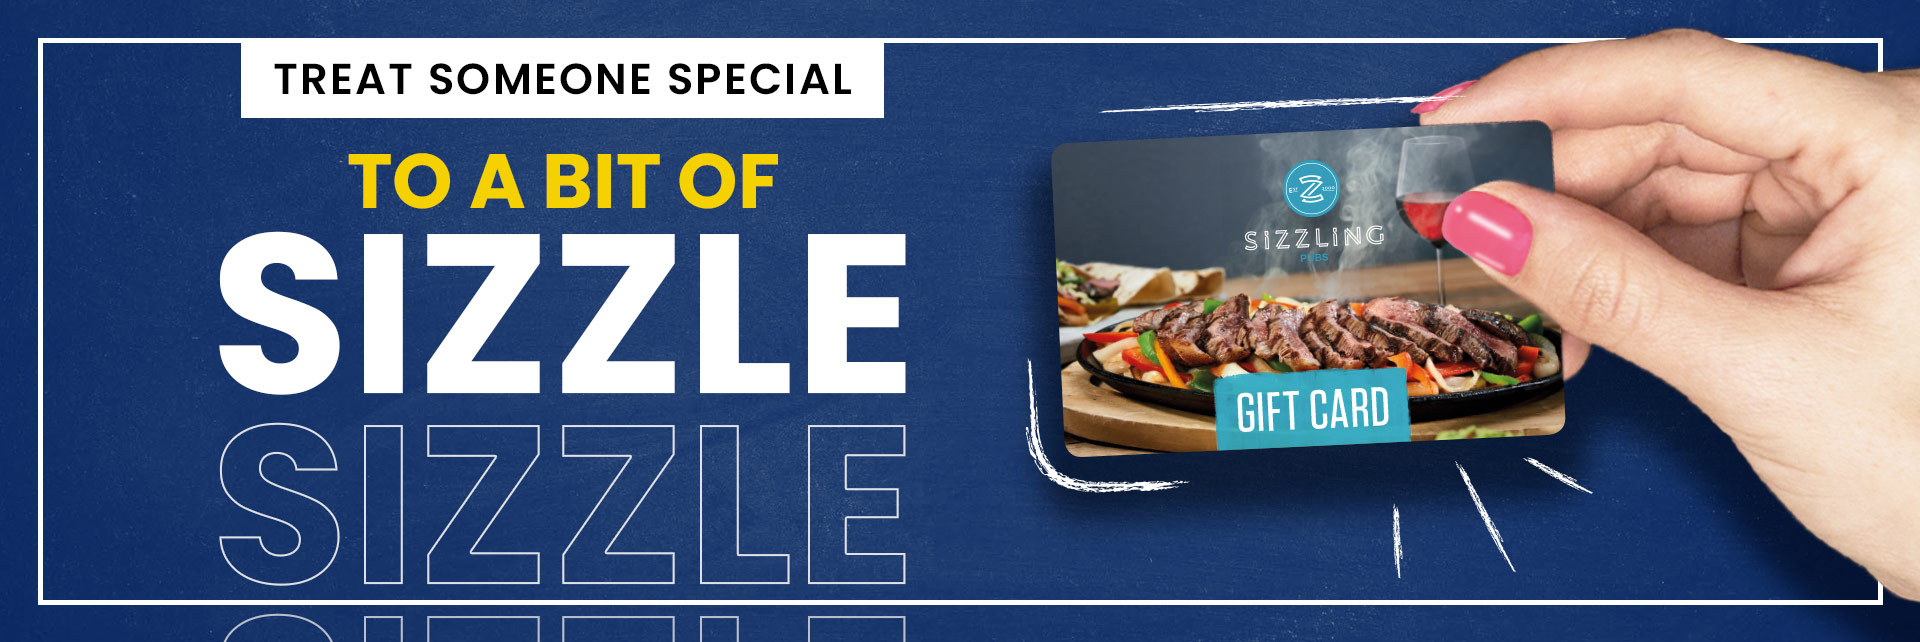 Sizzling Pubs Gift Card at The Smithy's Forge in Walsall